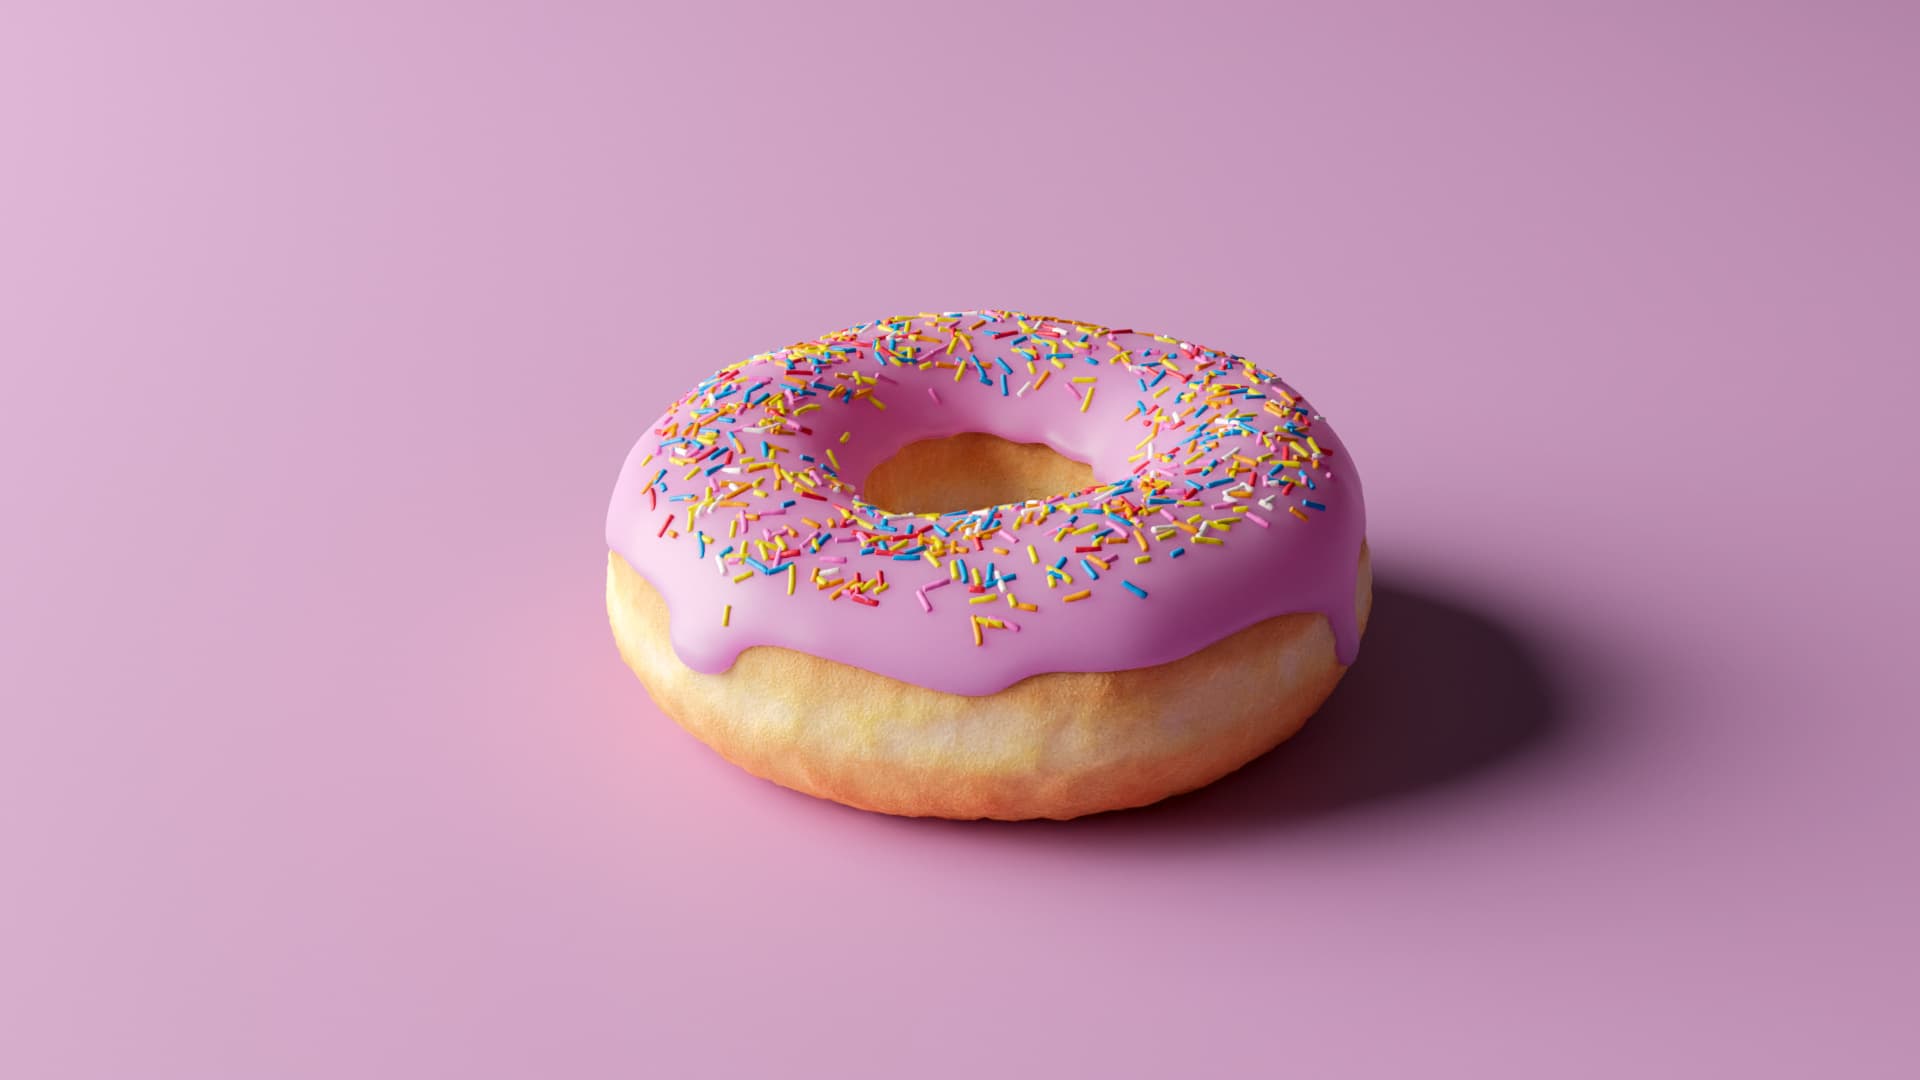 An image of a donut in a pink background with a pink icing on top with several colorful sprinkles.